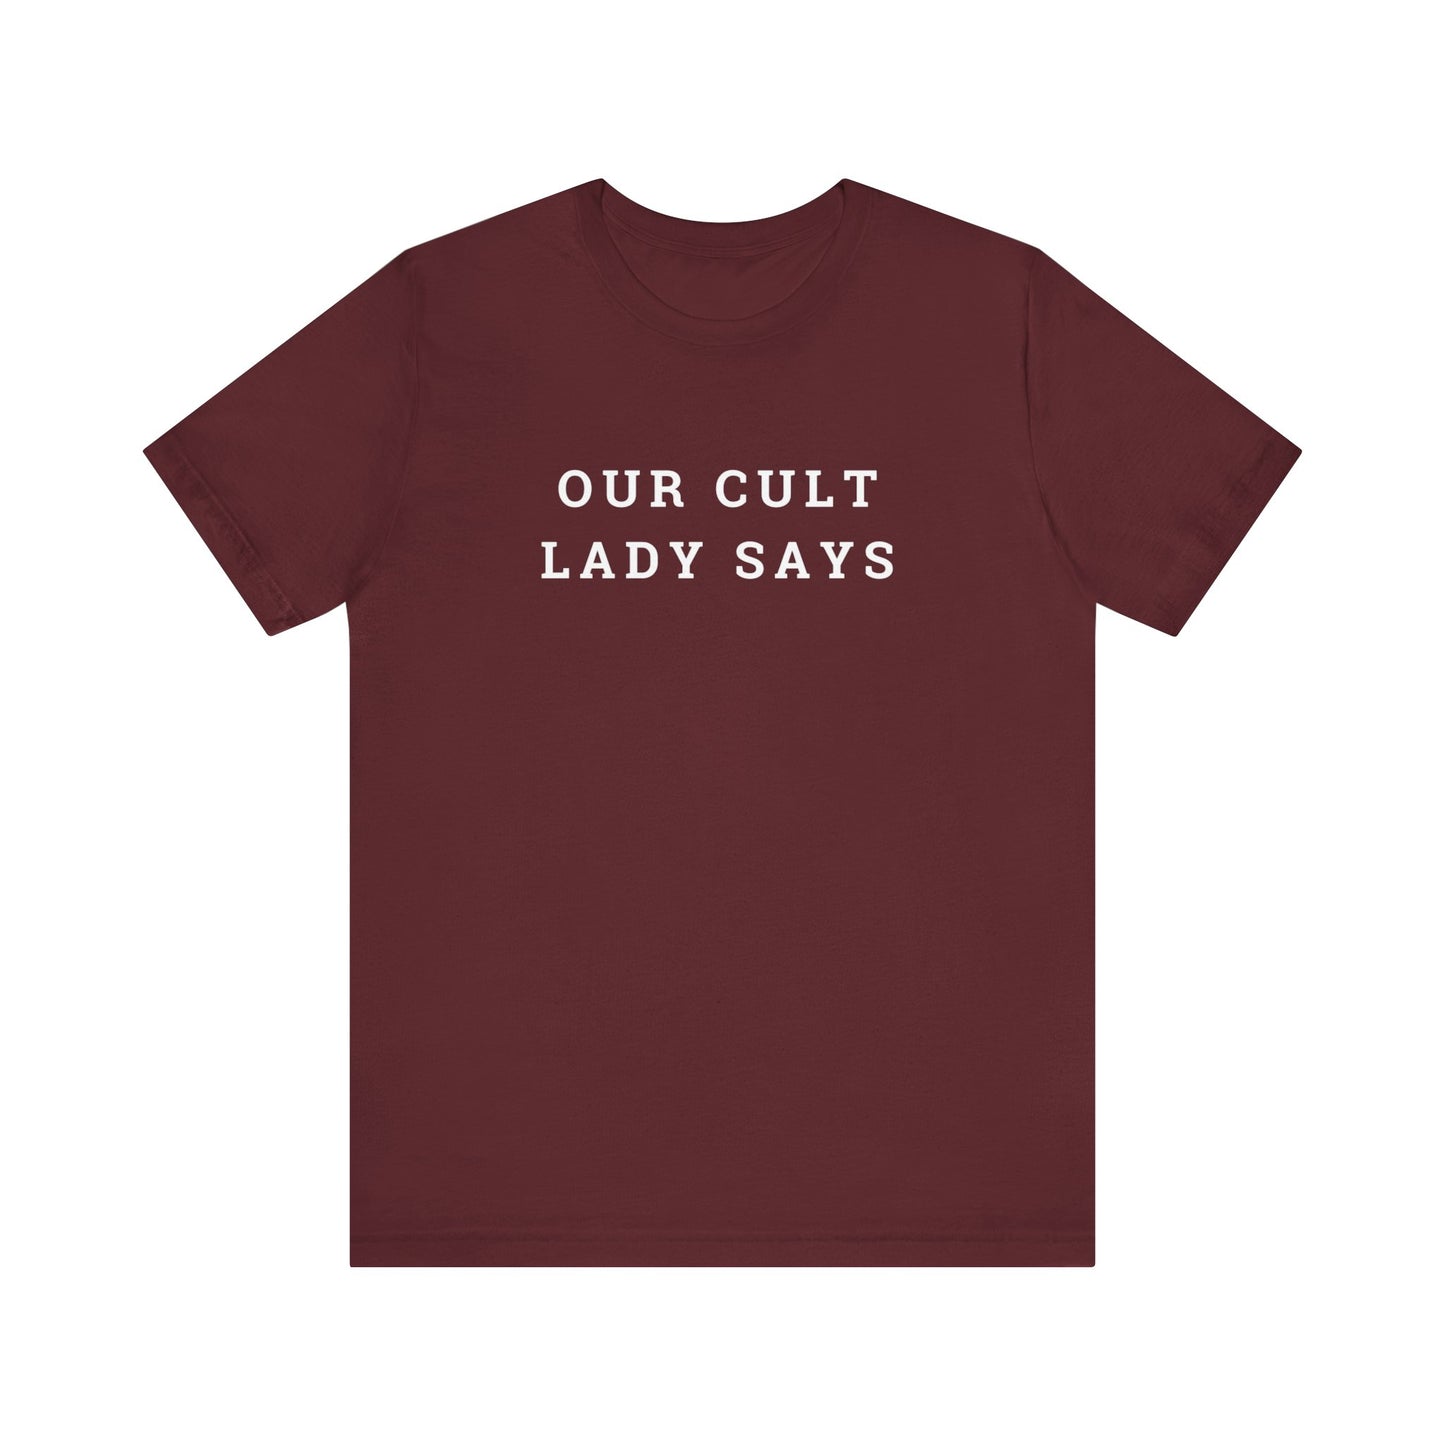 Our Cult Lady Says Unisex Jersey Short Sleeve Tee